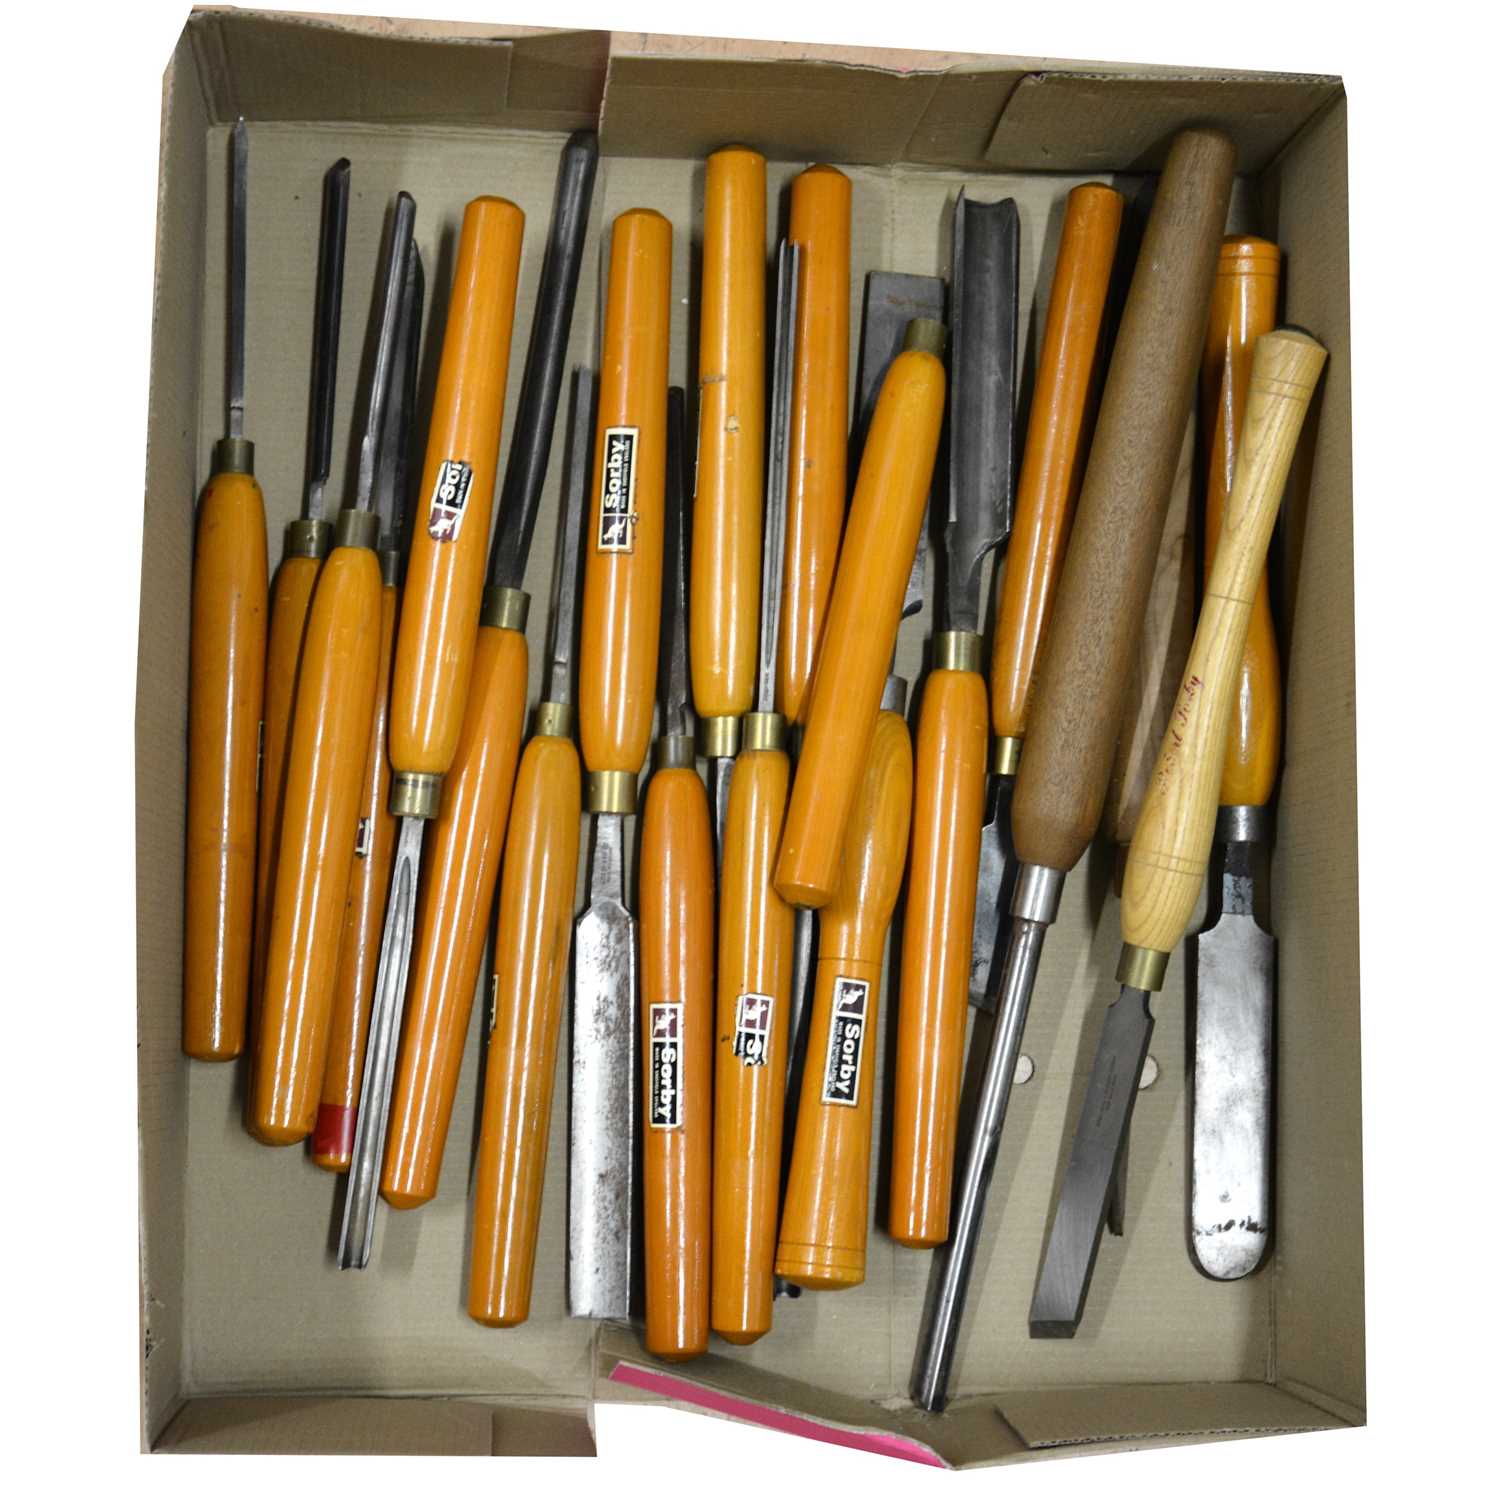 Lot 109 - Robert Sorby woodworking chisels and cutting tools, twenty various types, all with wooden handles.